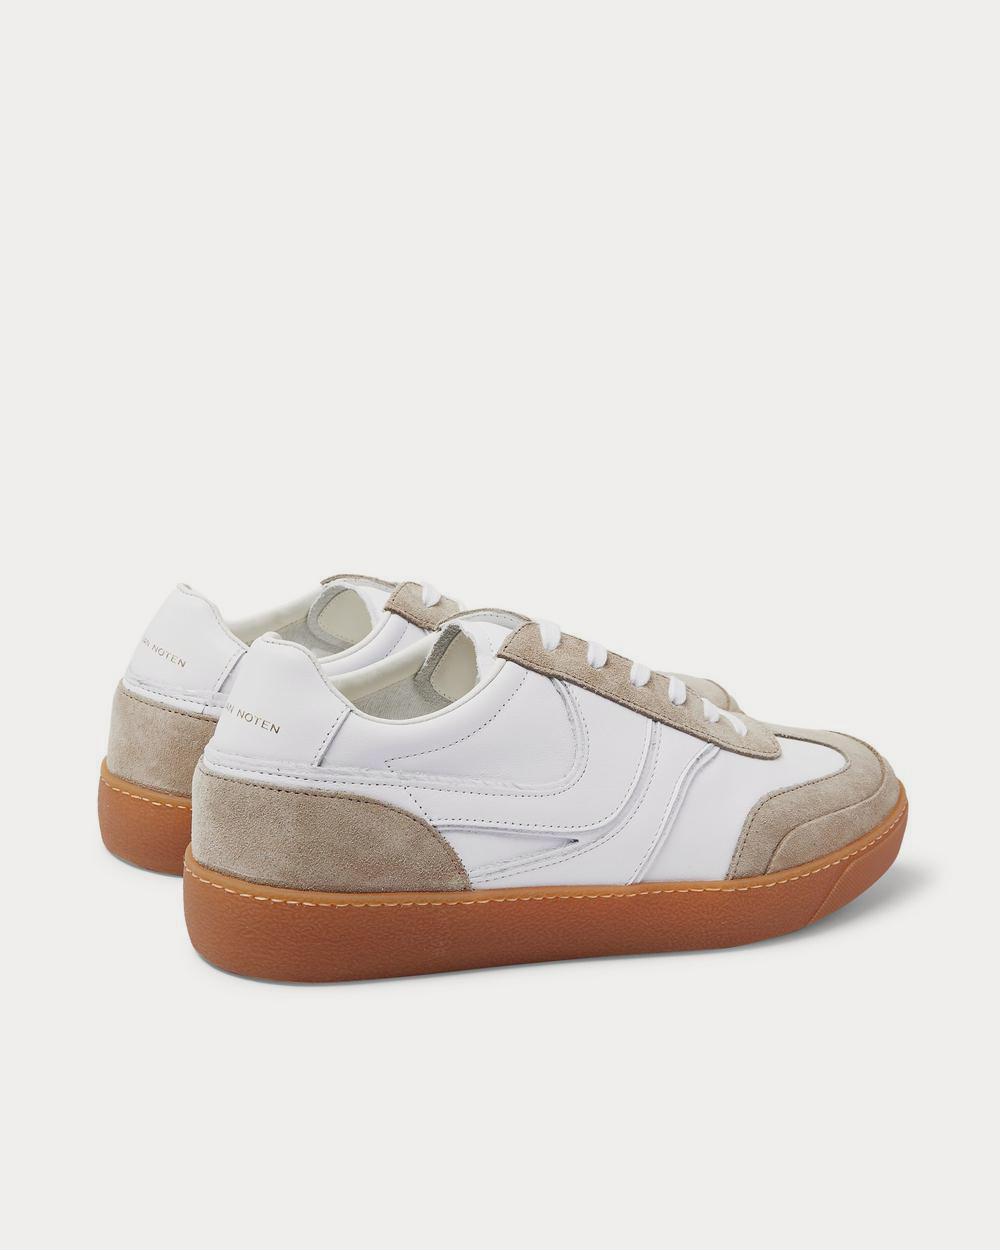 Dries Van Noten - Panelled Suede and Leather  White low top sneakers